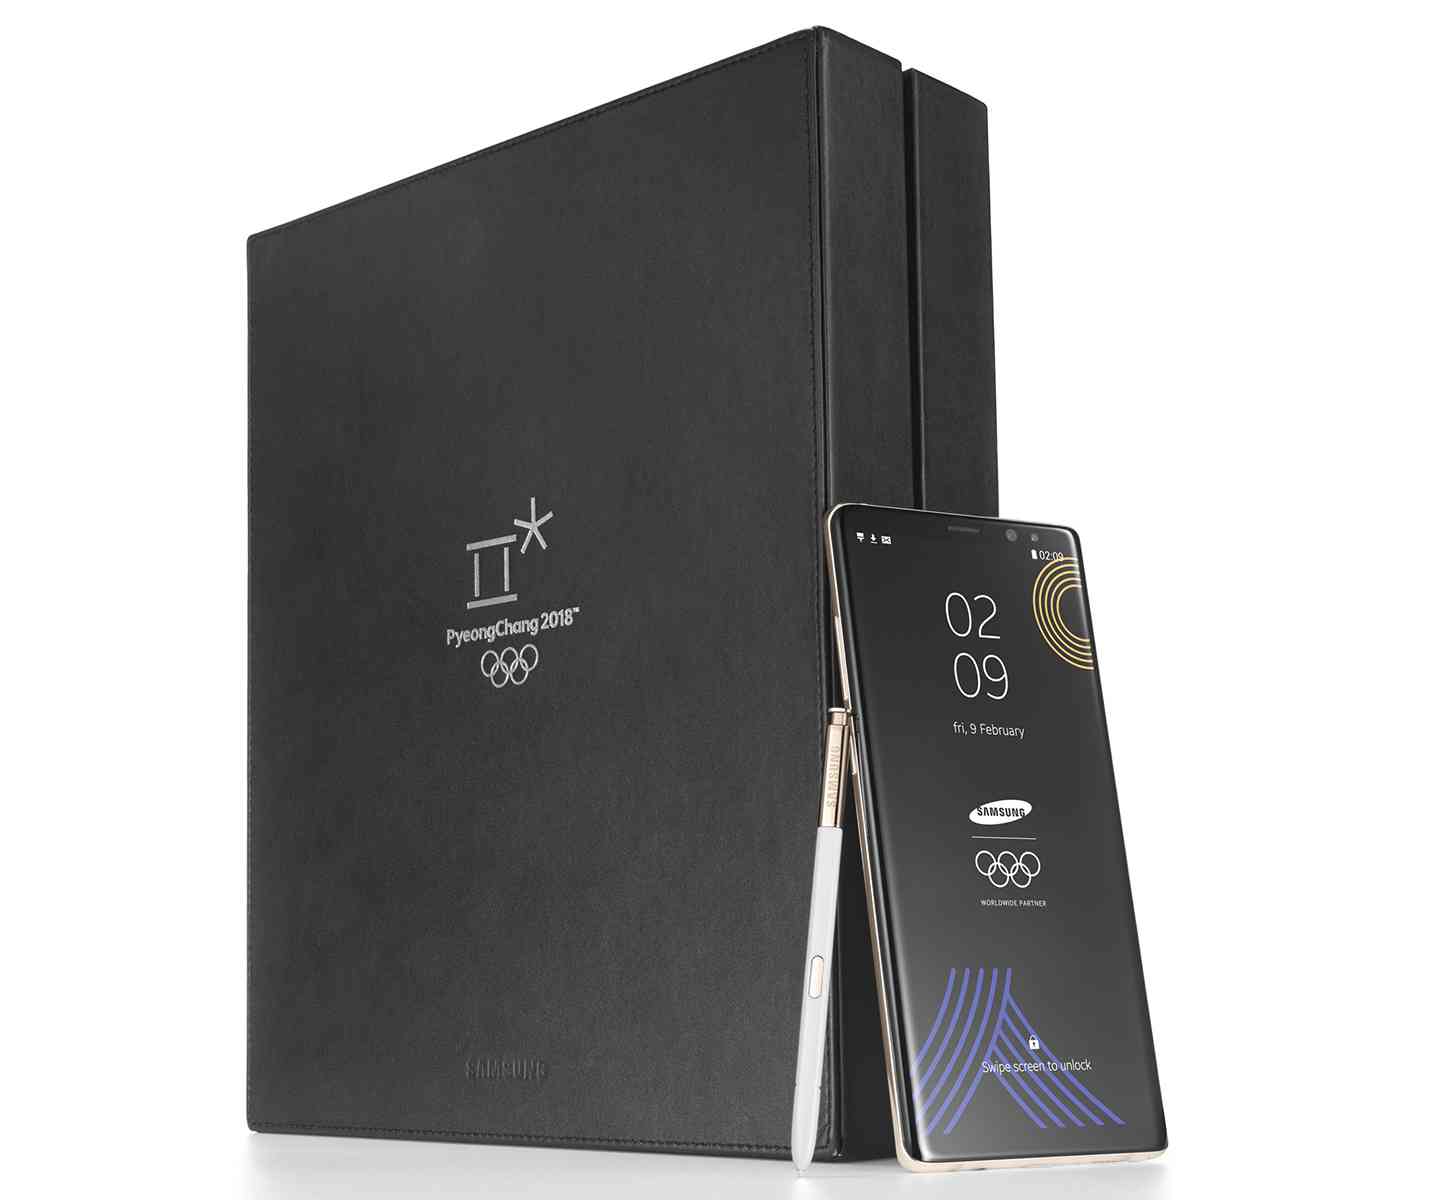 Samsung Galaxy Note 8 2018 Winter Olympics packaging